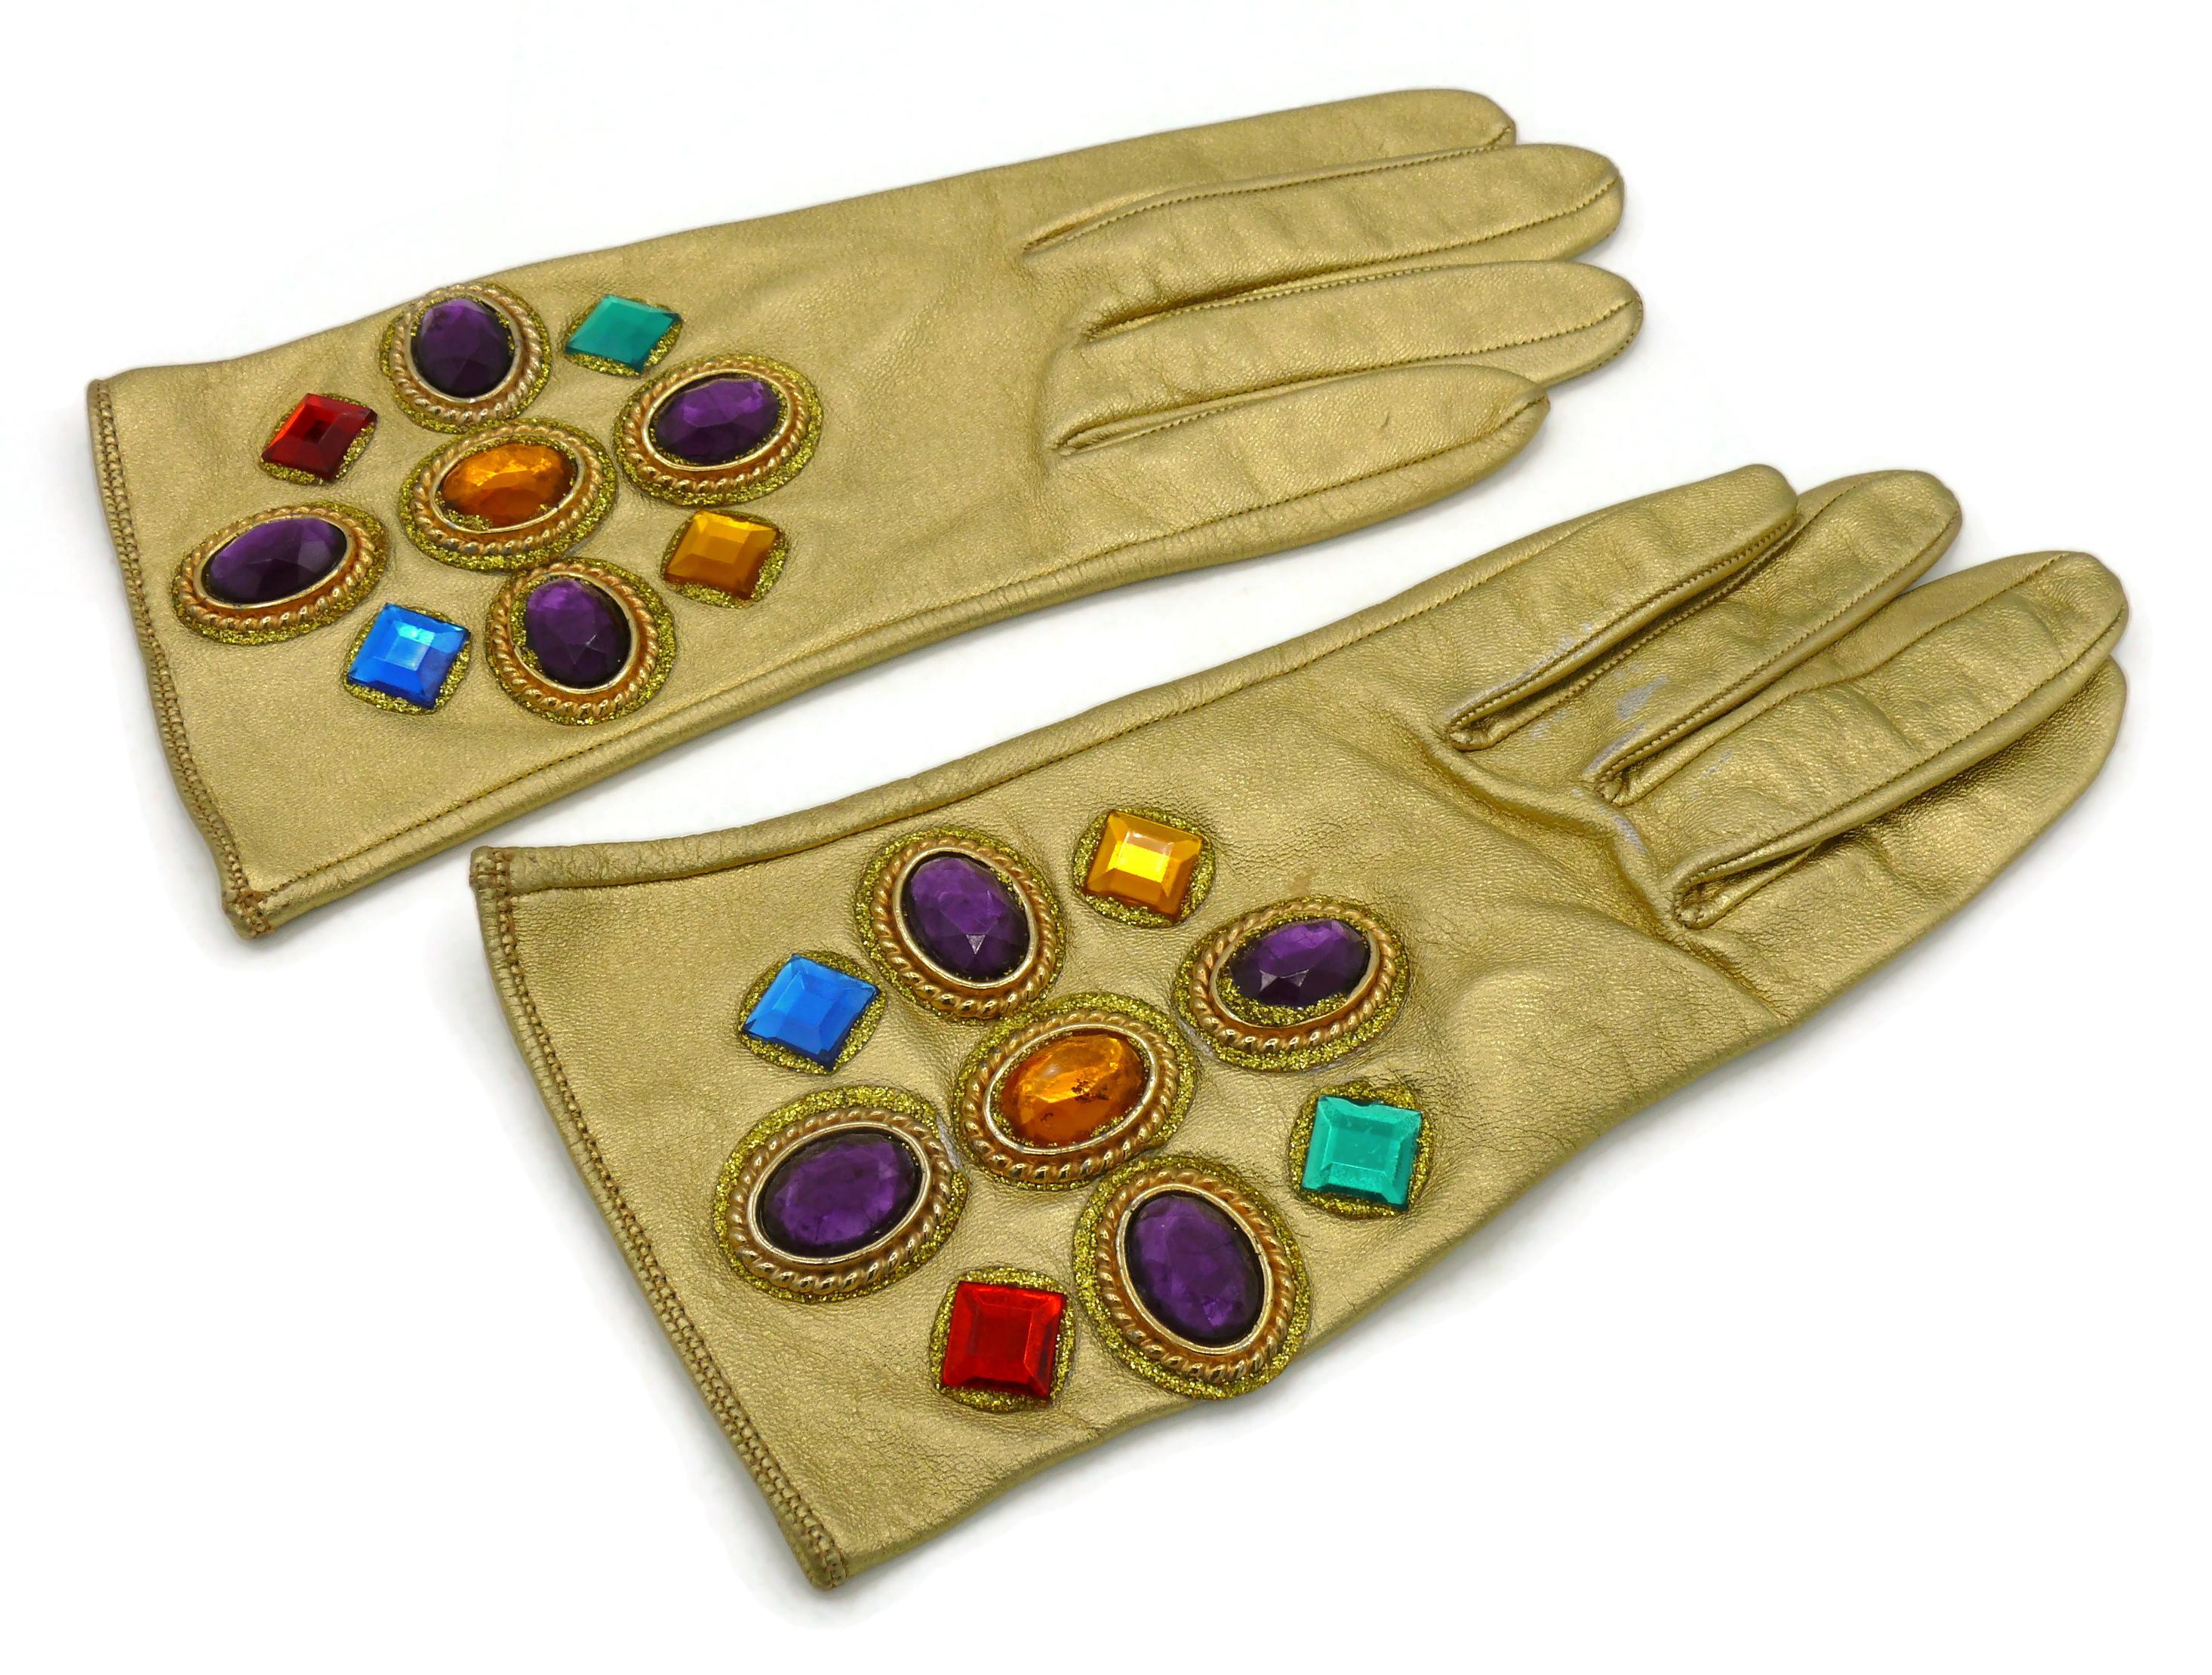 CHRISTIAN LACROIX Vintage Jewelled Golden Leather Gloves Size 7 In Fair Condition For Sale In Nice, FR